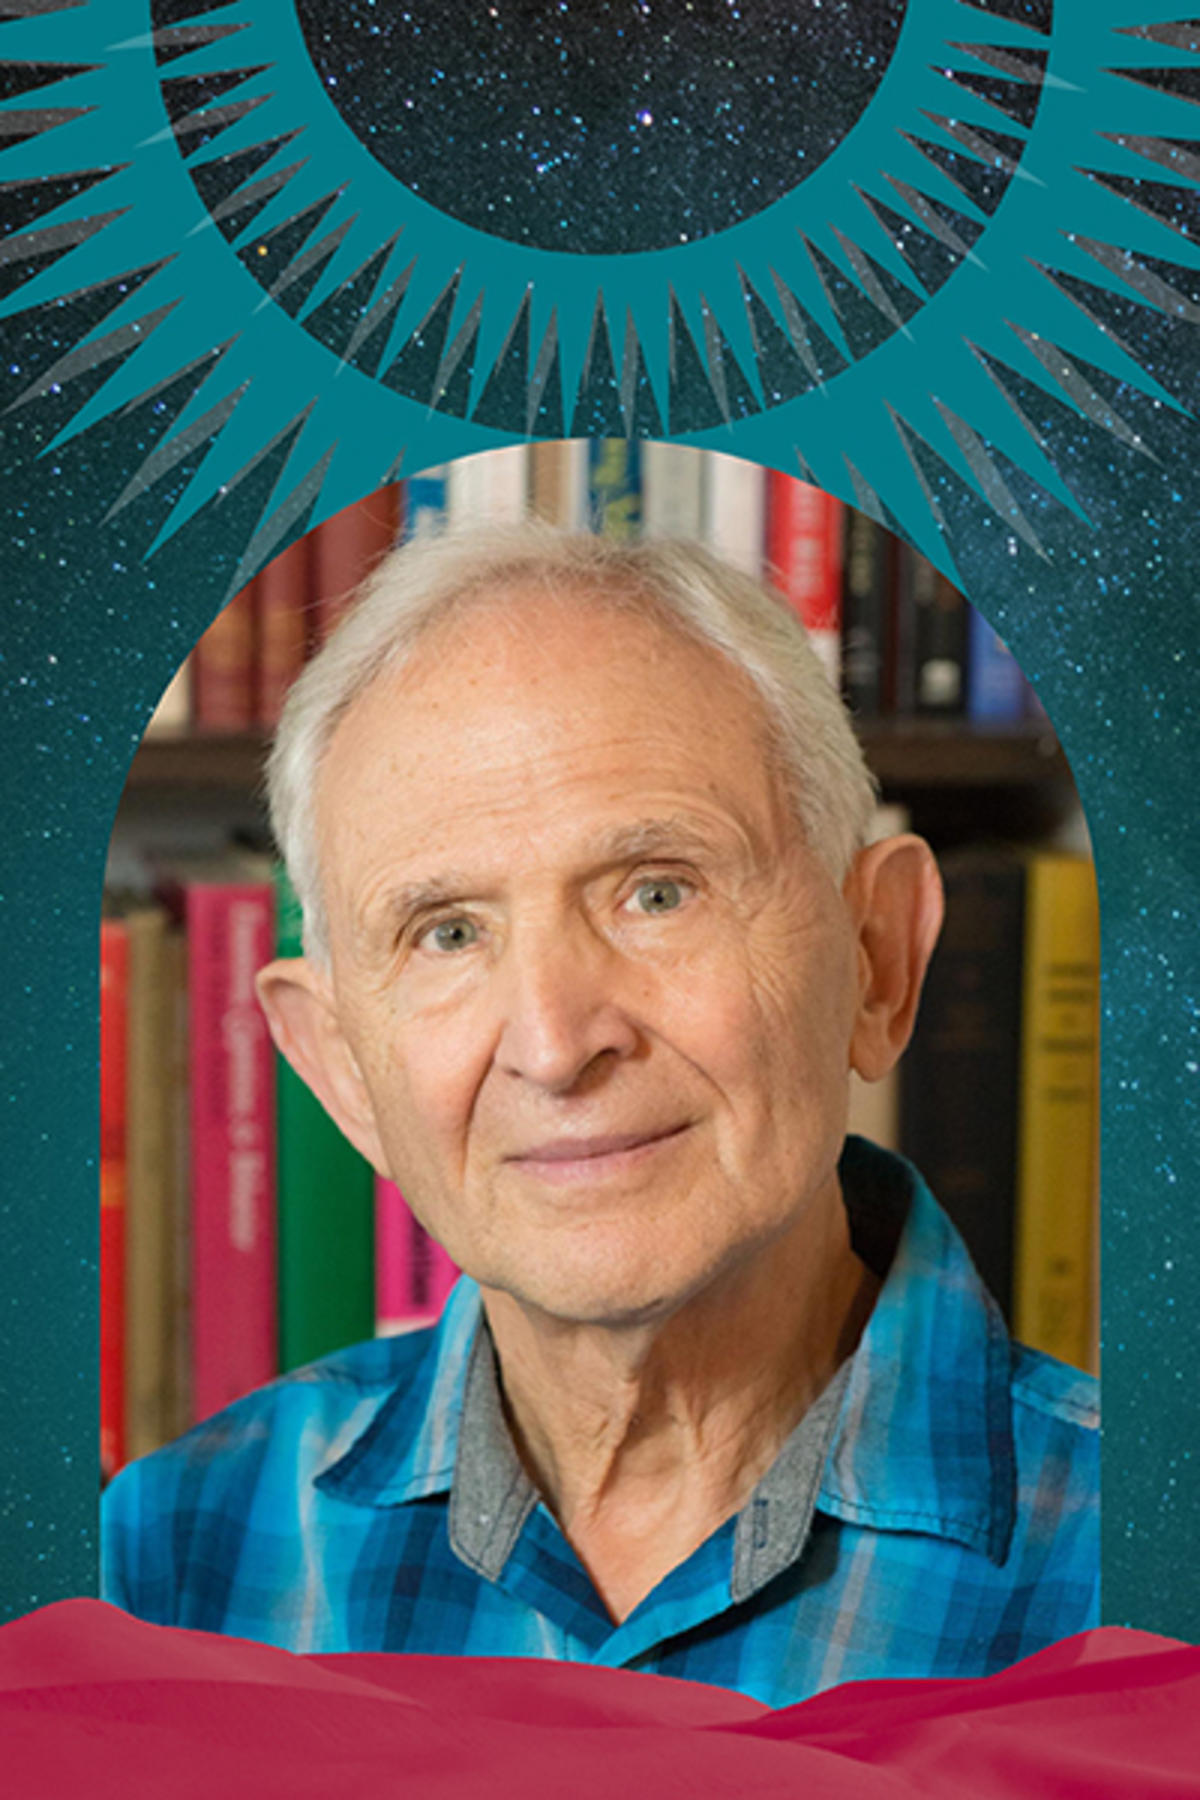 Peter Levine color portrait. Peter Levine is an older, white man posed in front of bookshelves lined with books. He is smiling and wearing a brightly-colored plaid button-down. Surrounding him is an illustration of red mountains, bright blue rings of the sun and his portrait is inside a portal-like door.